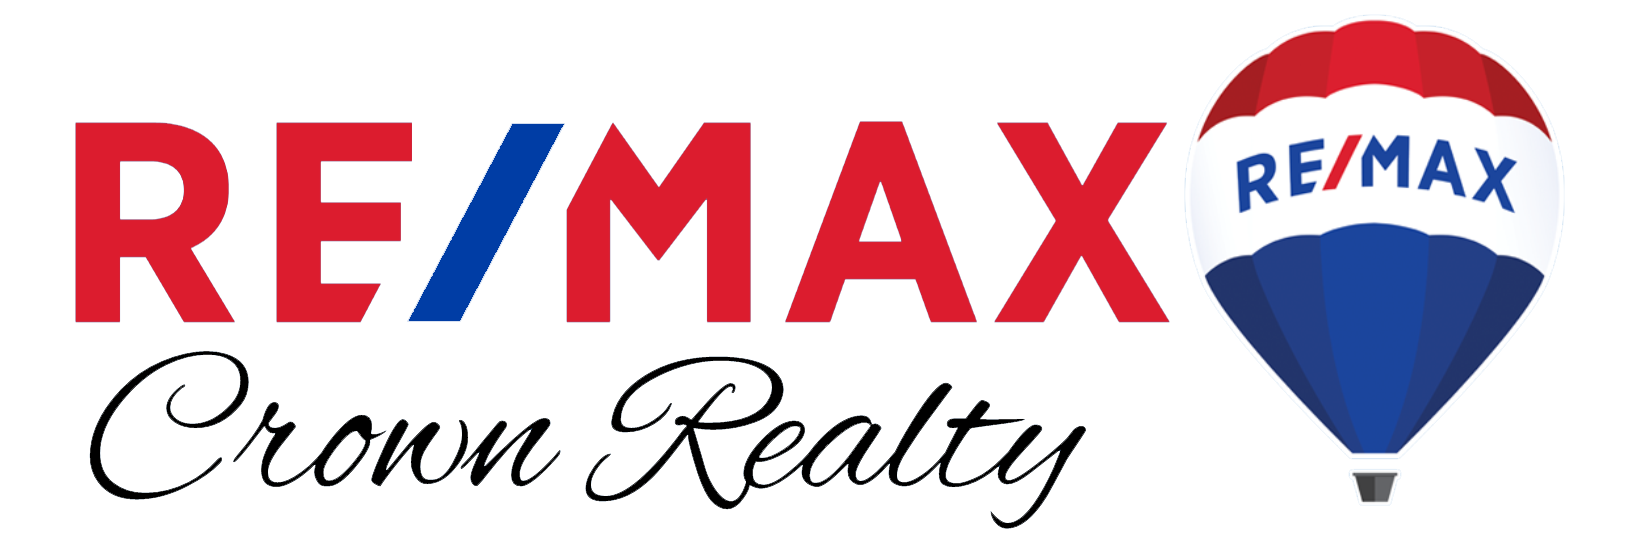 RE/MAX Crown Realty